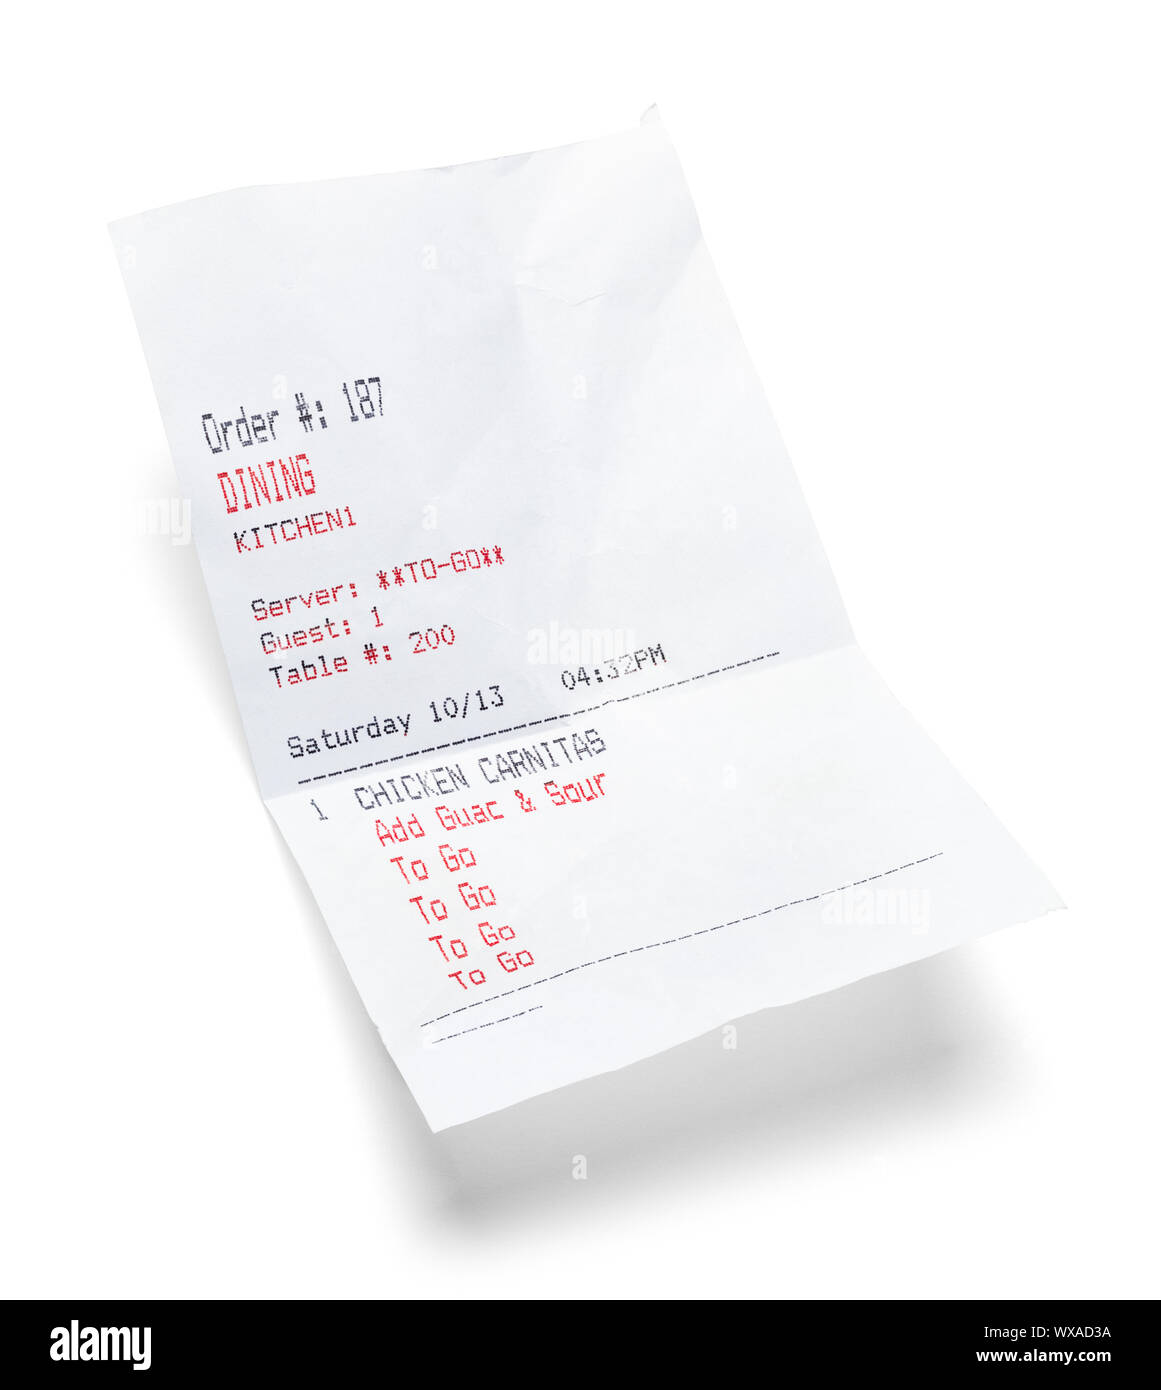 Mexican Food Take Out Receipt Isolated on White. Stock Photo